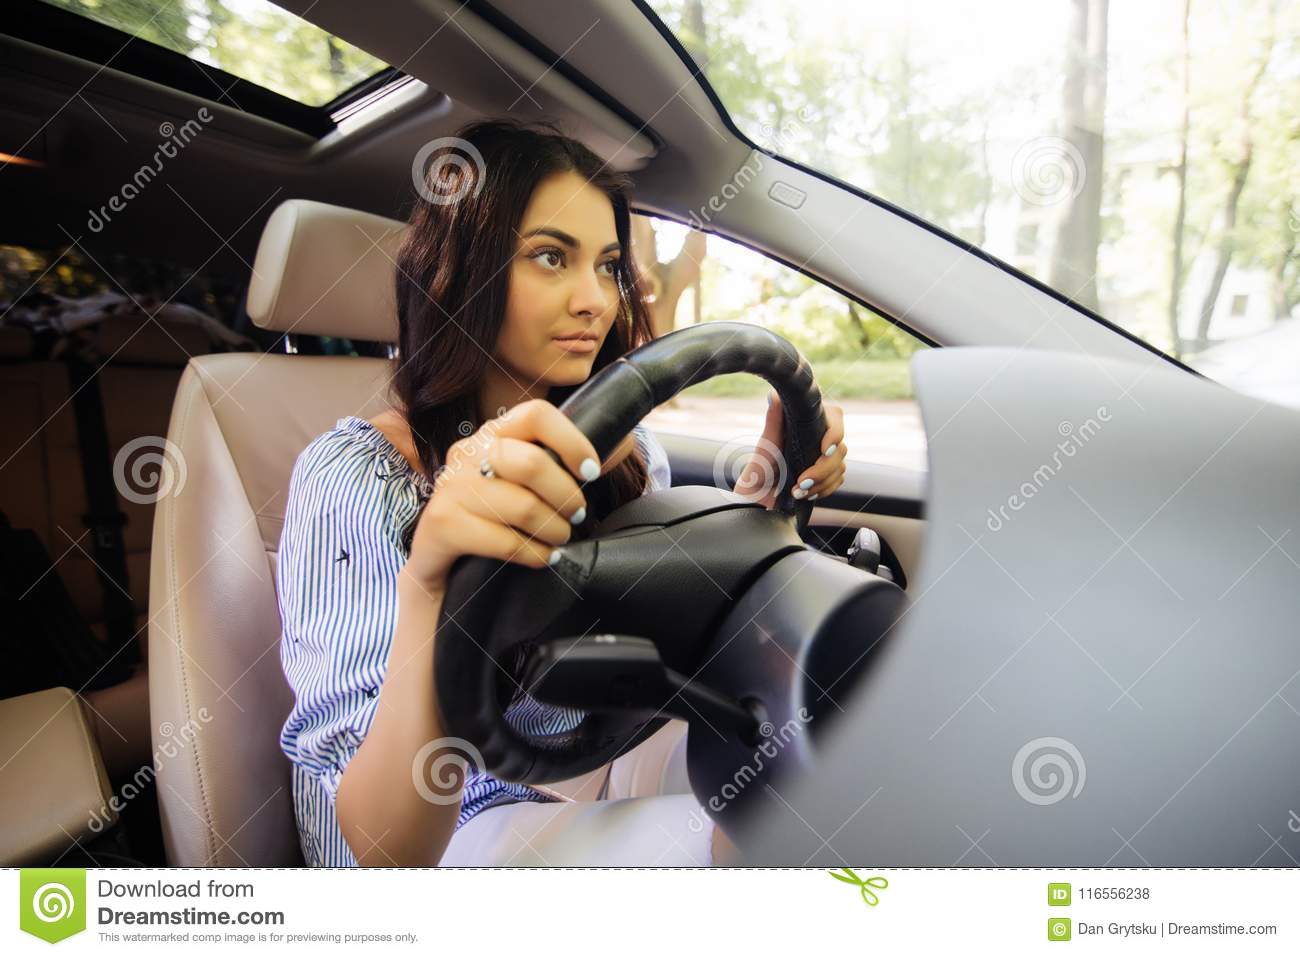 driver_woman_driving_car_concentrated_lear_to_drive_young_116556238.jpg